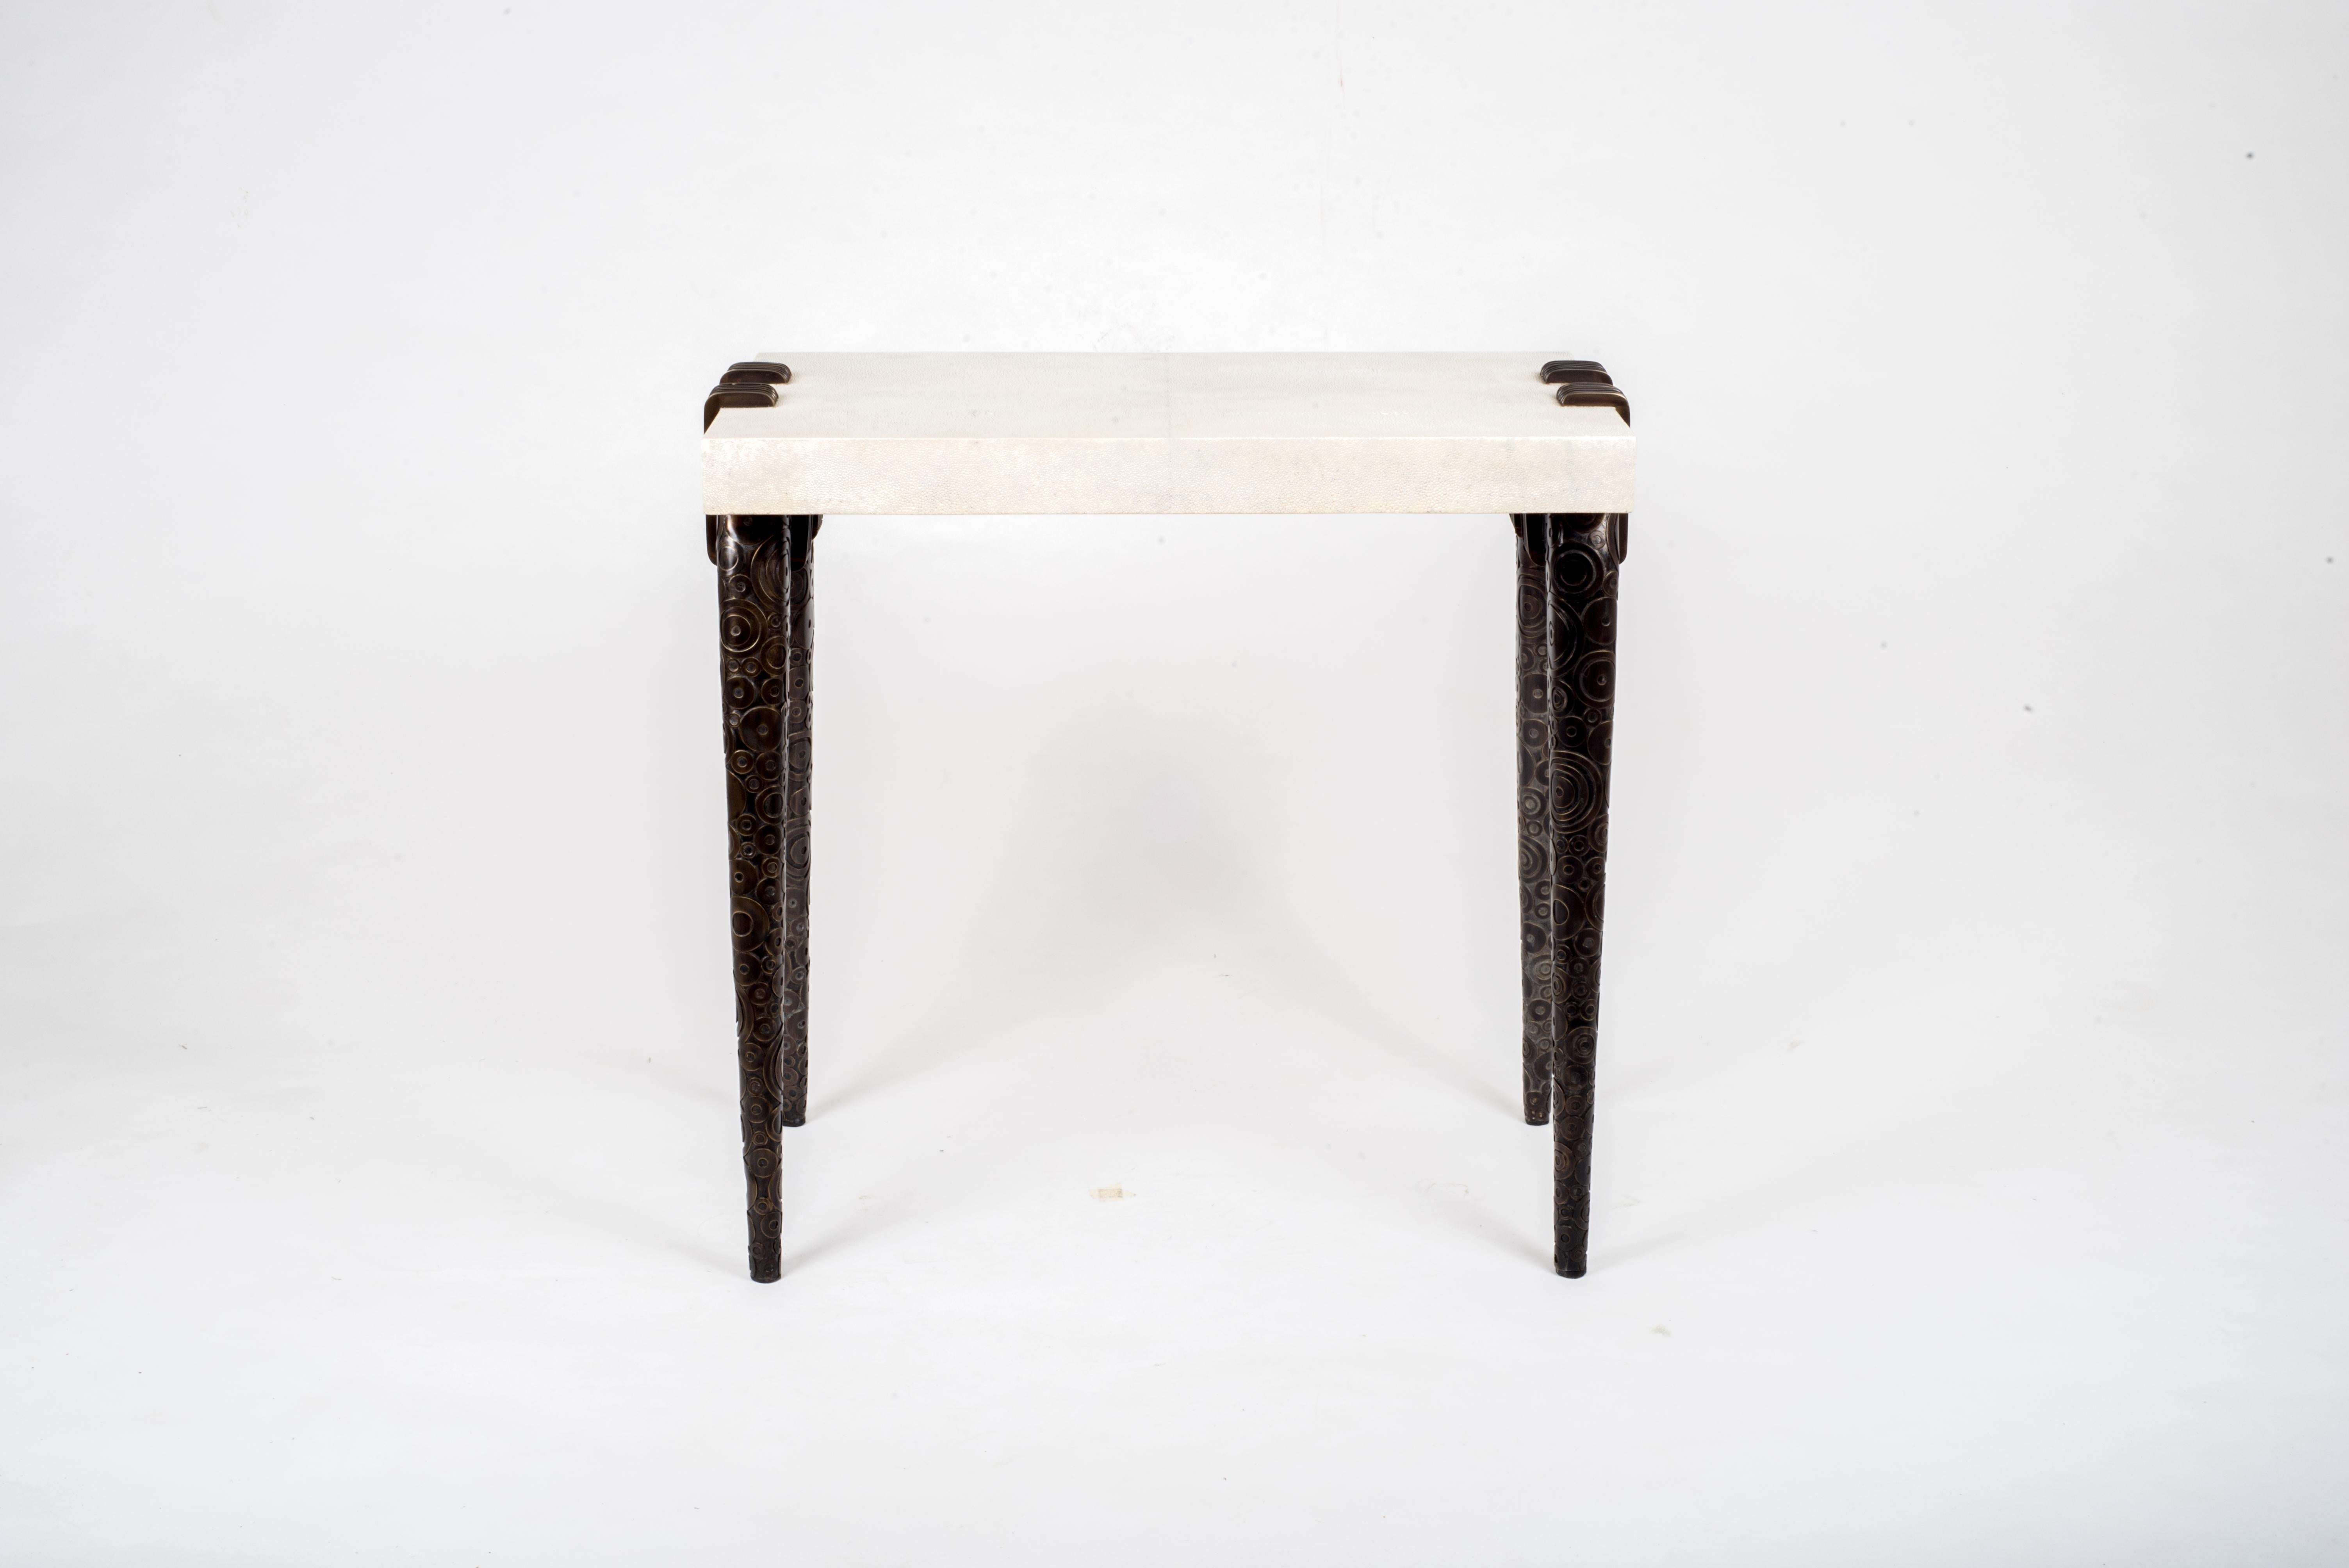 The circular dark bronze patina brass inlay details on the legs of the Vogue side table shows the true craftsmanship of Augousti artisans. The legs clasp onto the side of the cream shagreen rectangle top. This piece is a nod to the Art-Deco period